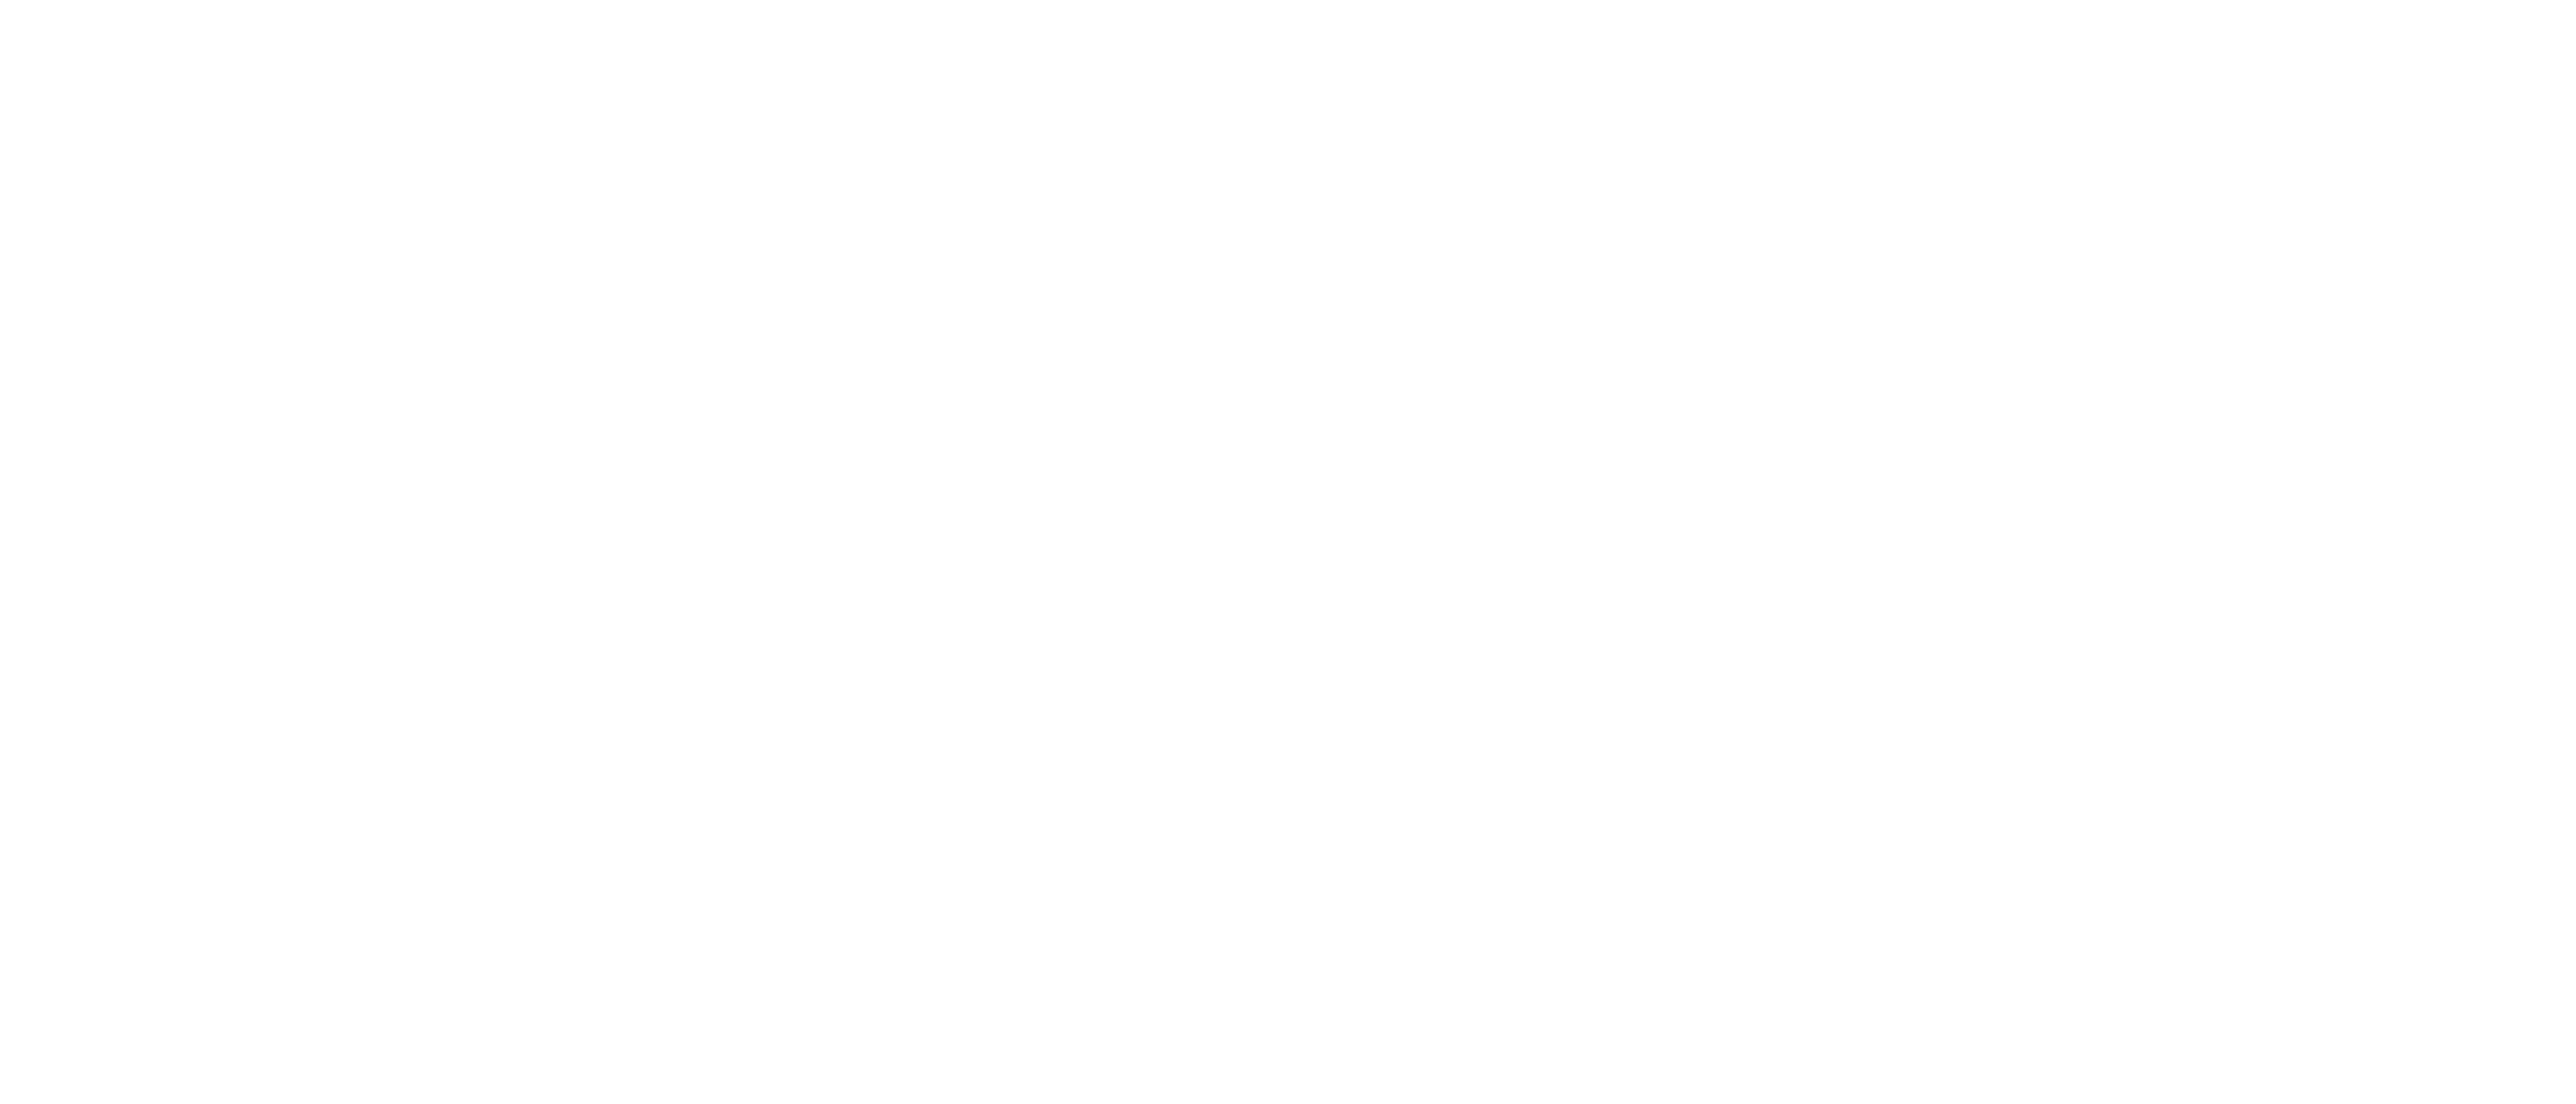 Asher Spaces India